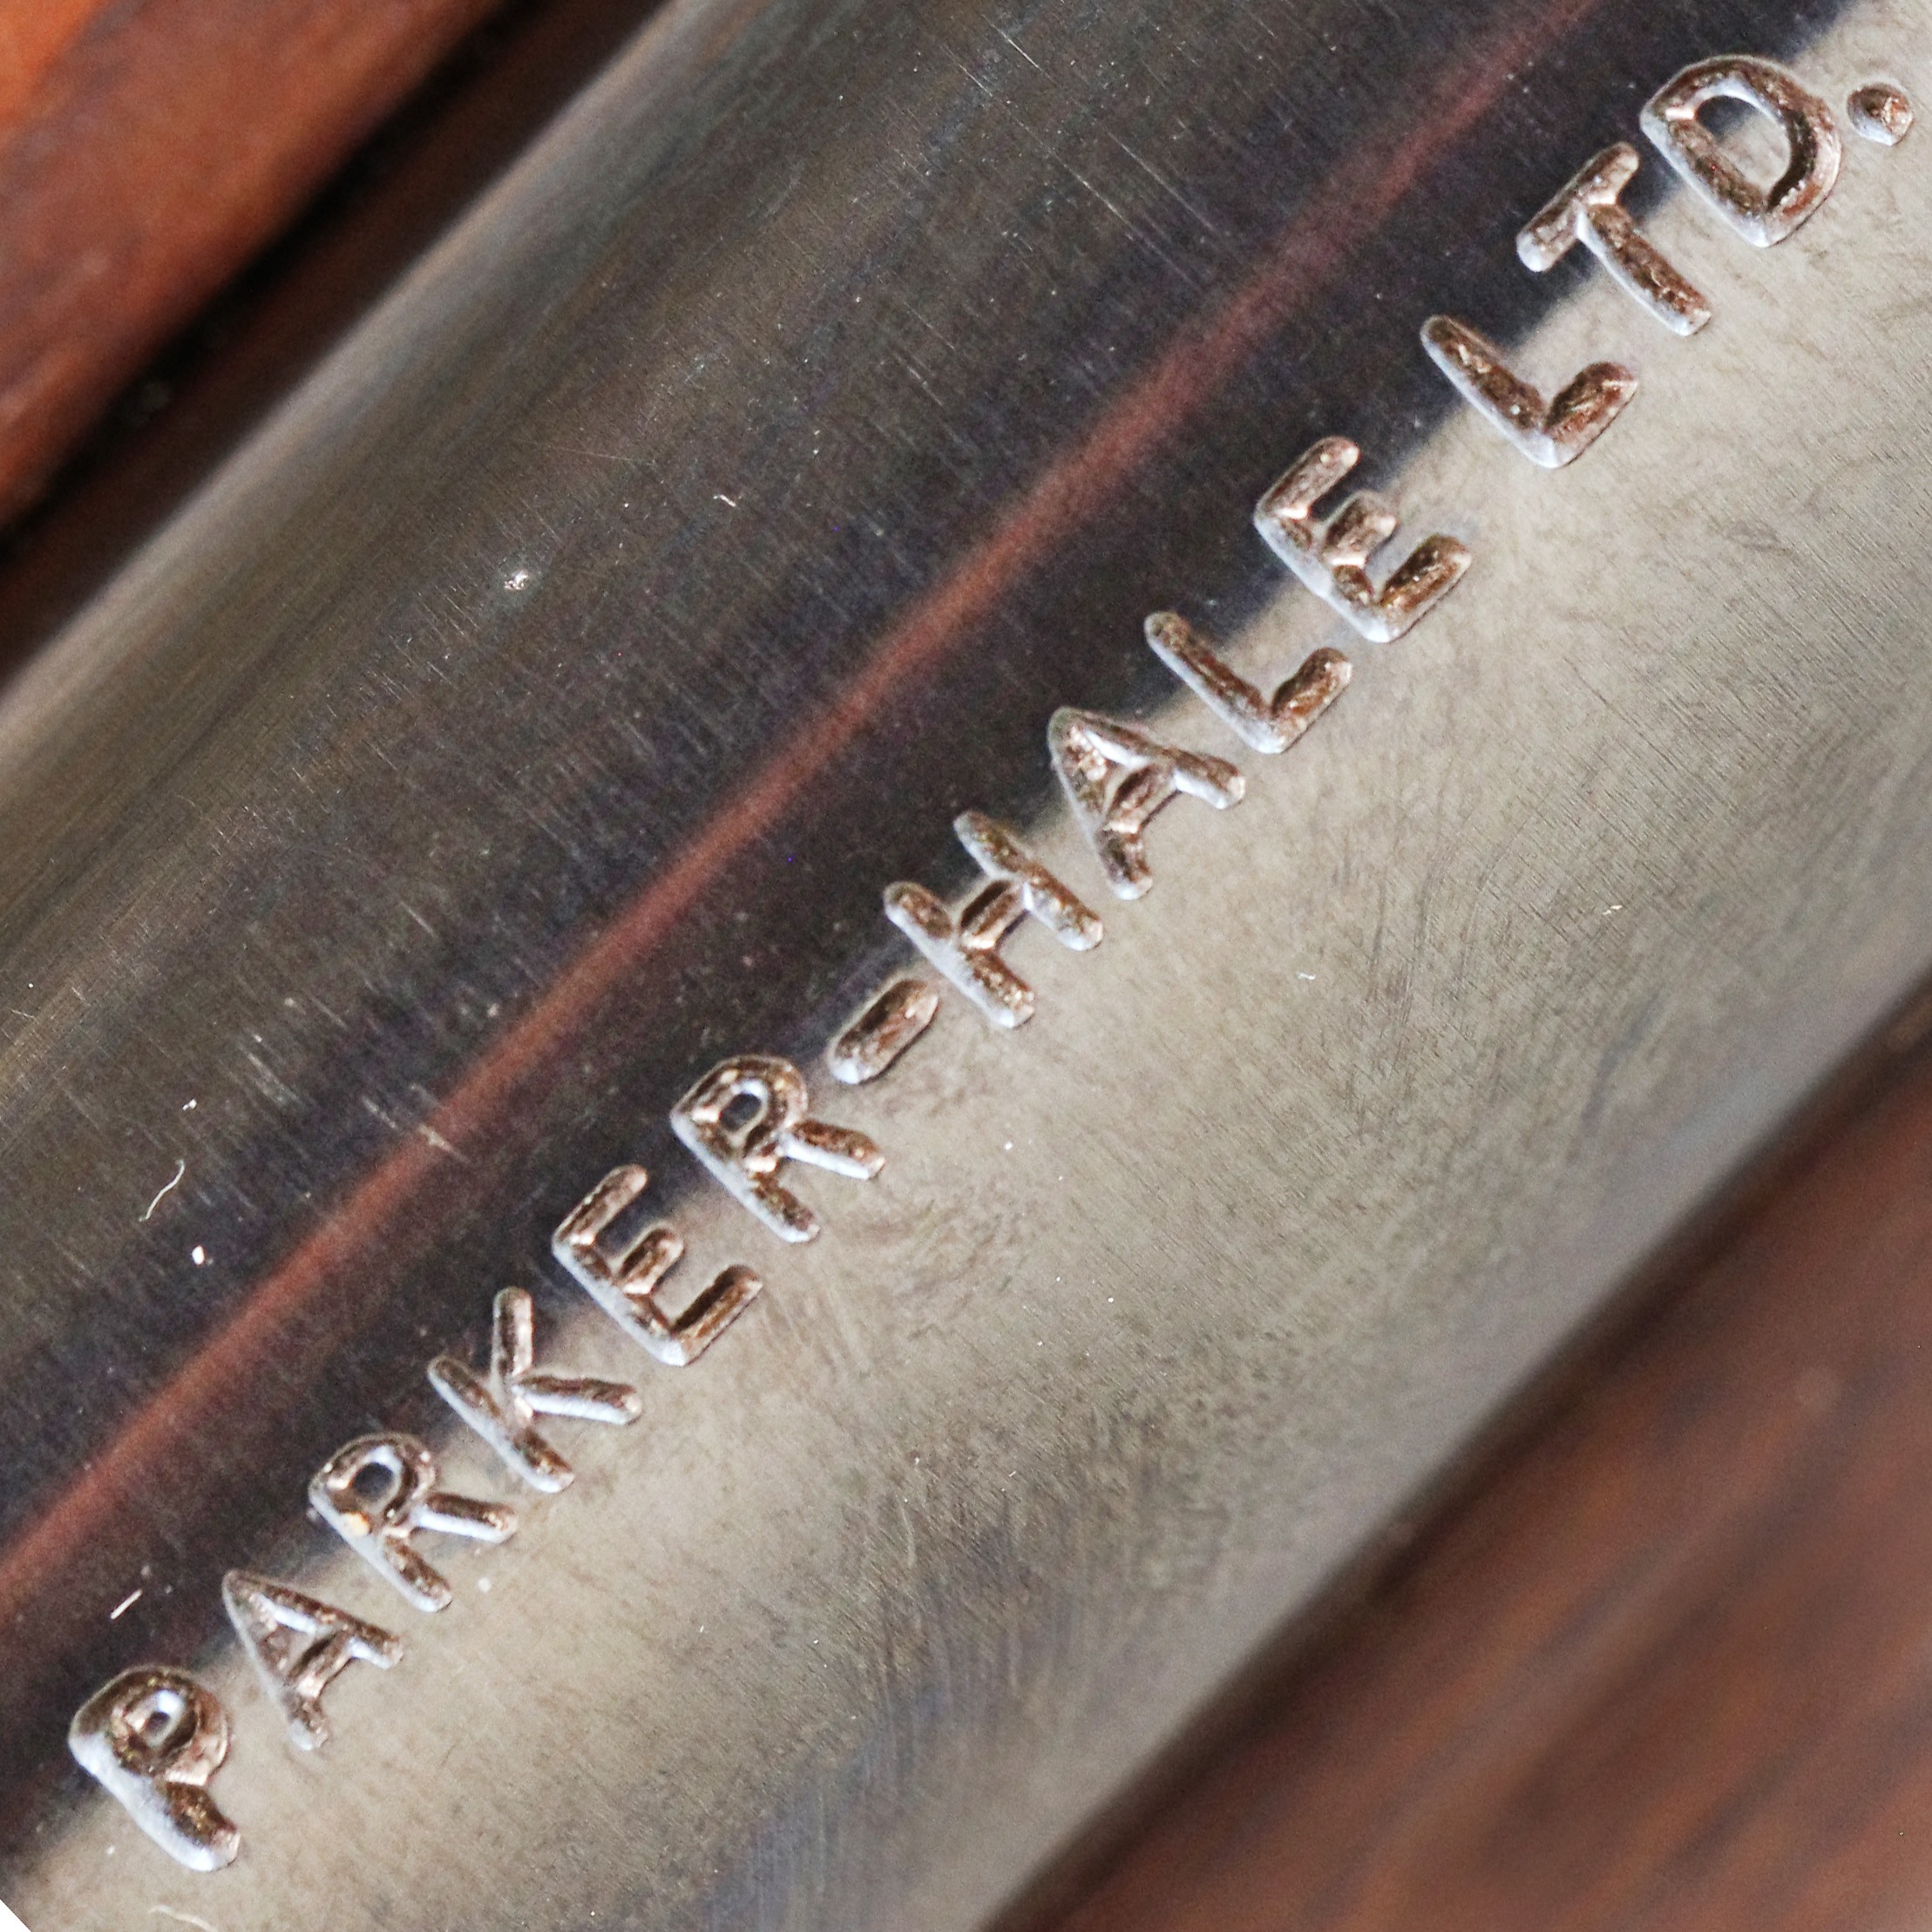 Parker Hale Black Powder Replicas: Tips On Care, Loading & Cleaning